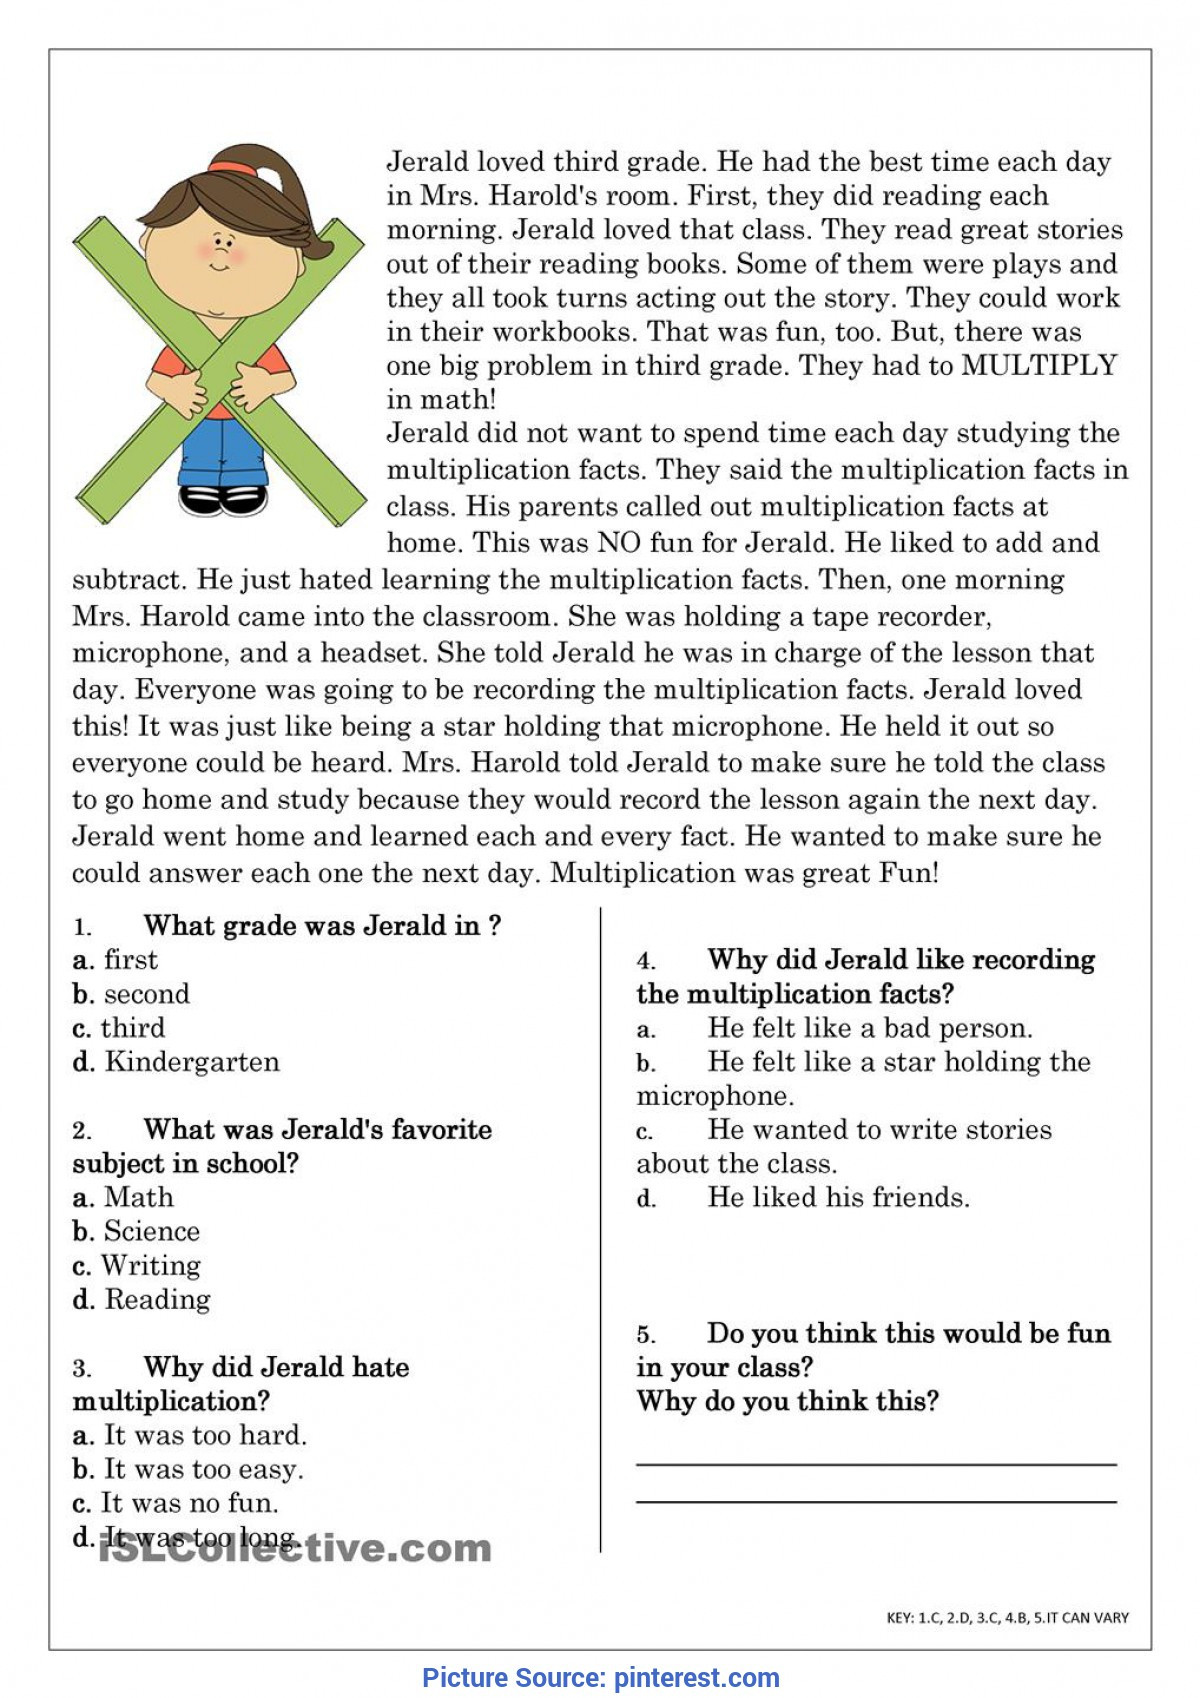 Reading Comprehension Lesson Plan Best Creative Curriculum Sample Lesson Plans for Preschool